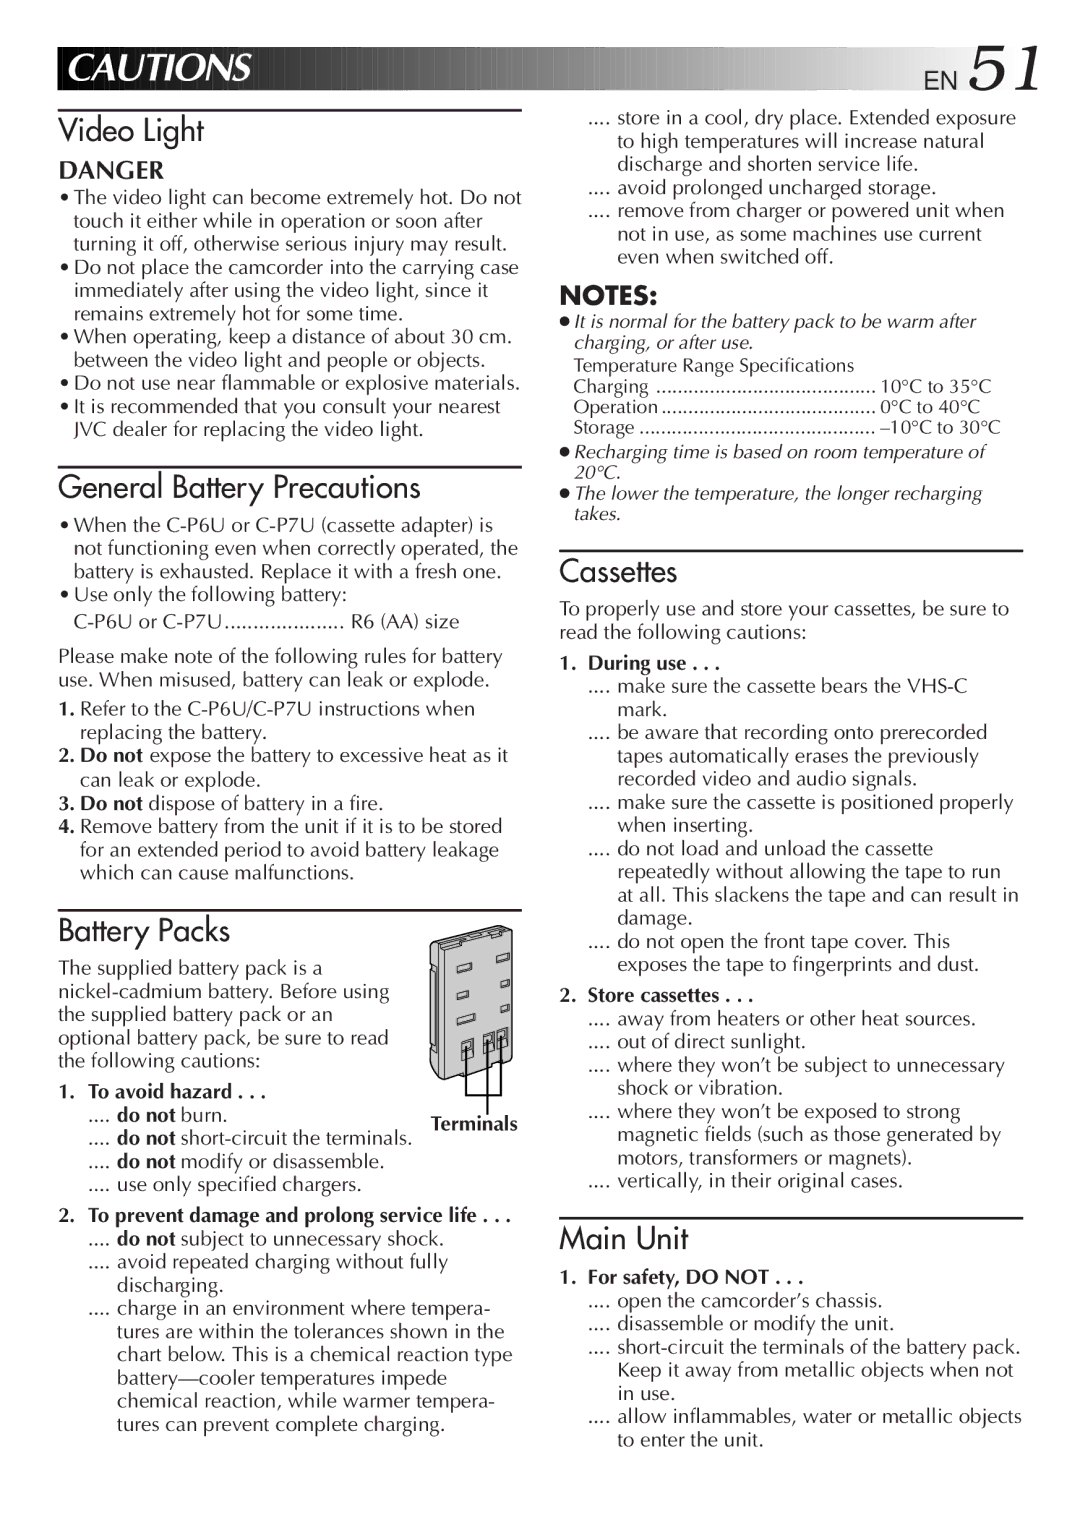 JVC GR-AX380, GR-AX285 manual To avoid hazard, During use, Store cassettes, For safety, do not 